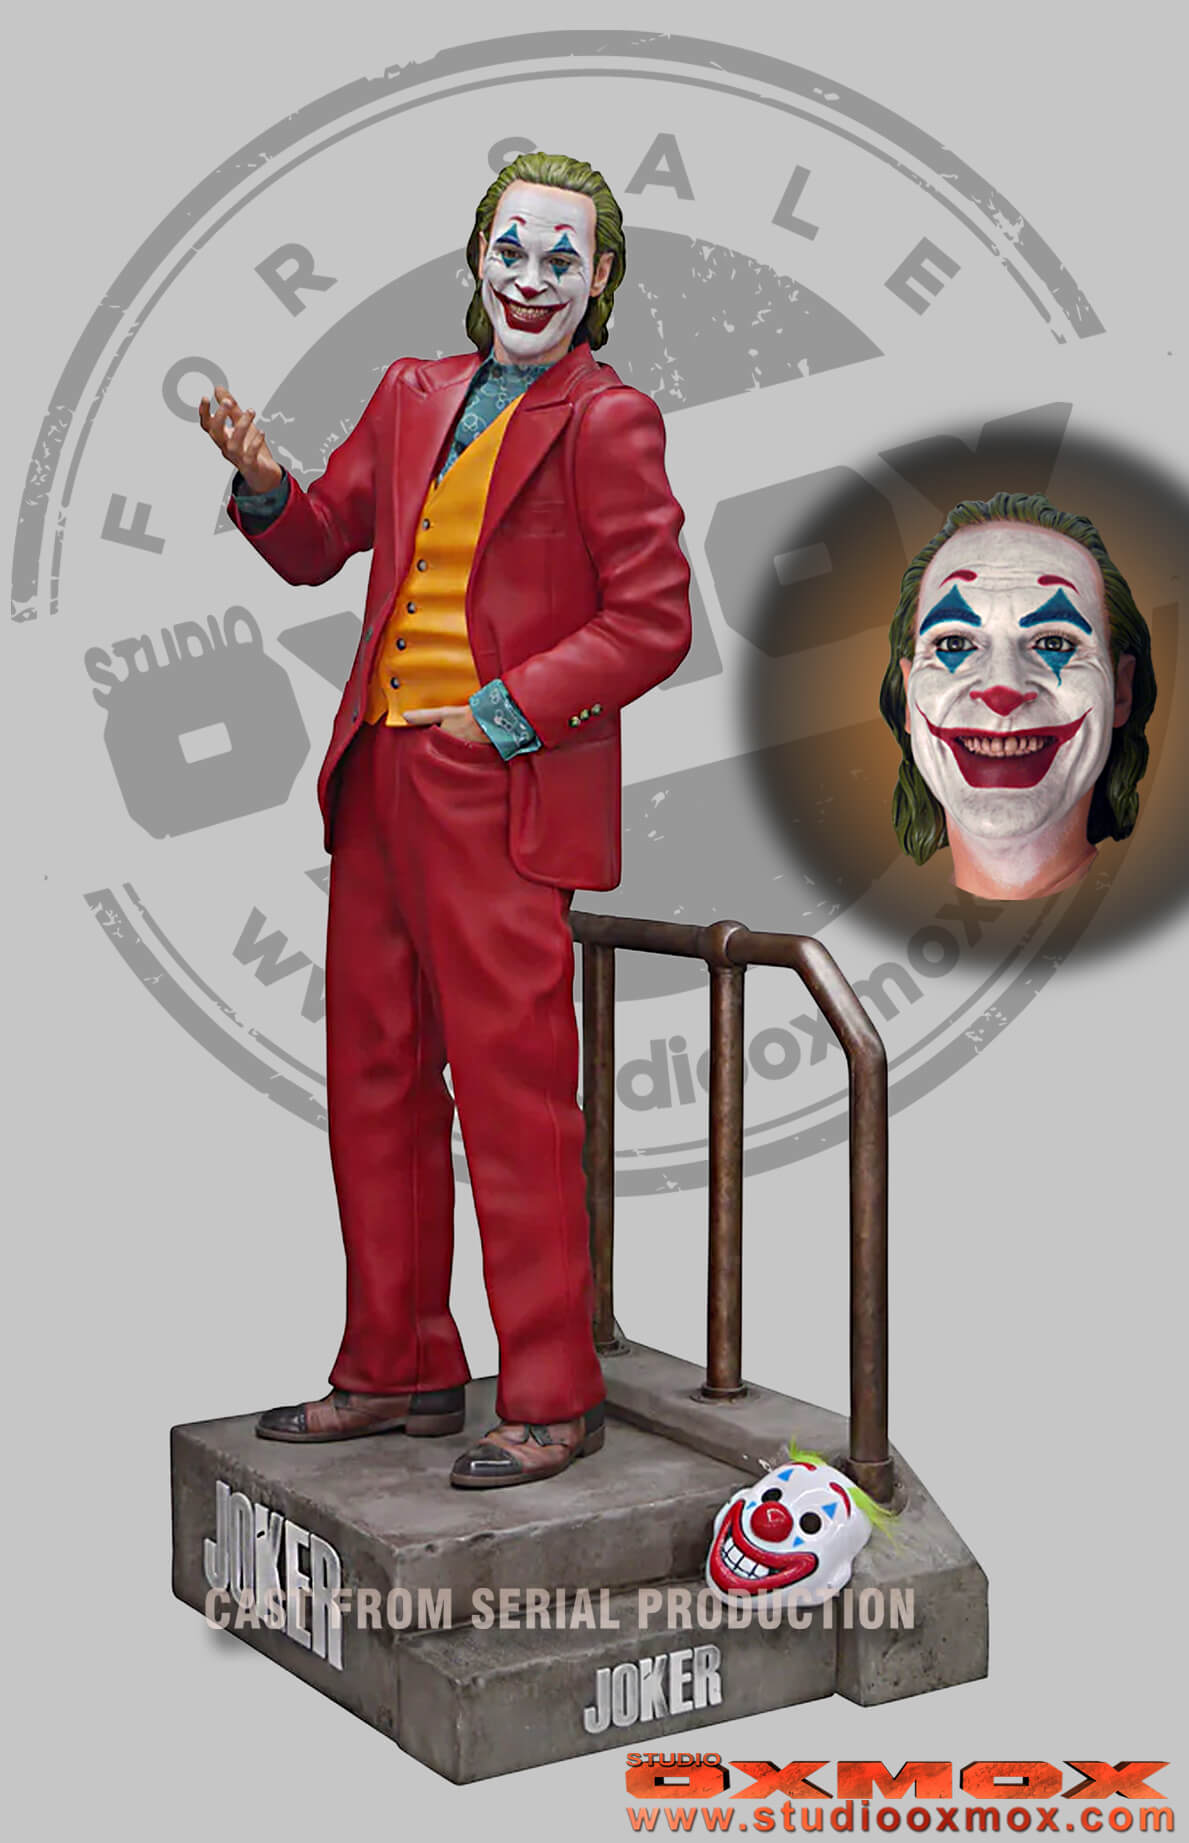 The Joker life size statue, smiley face, movie 2019